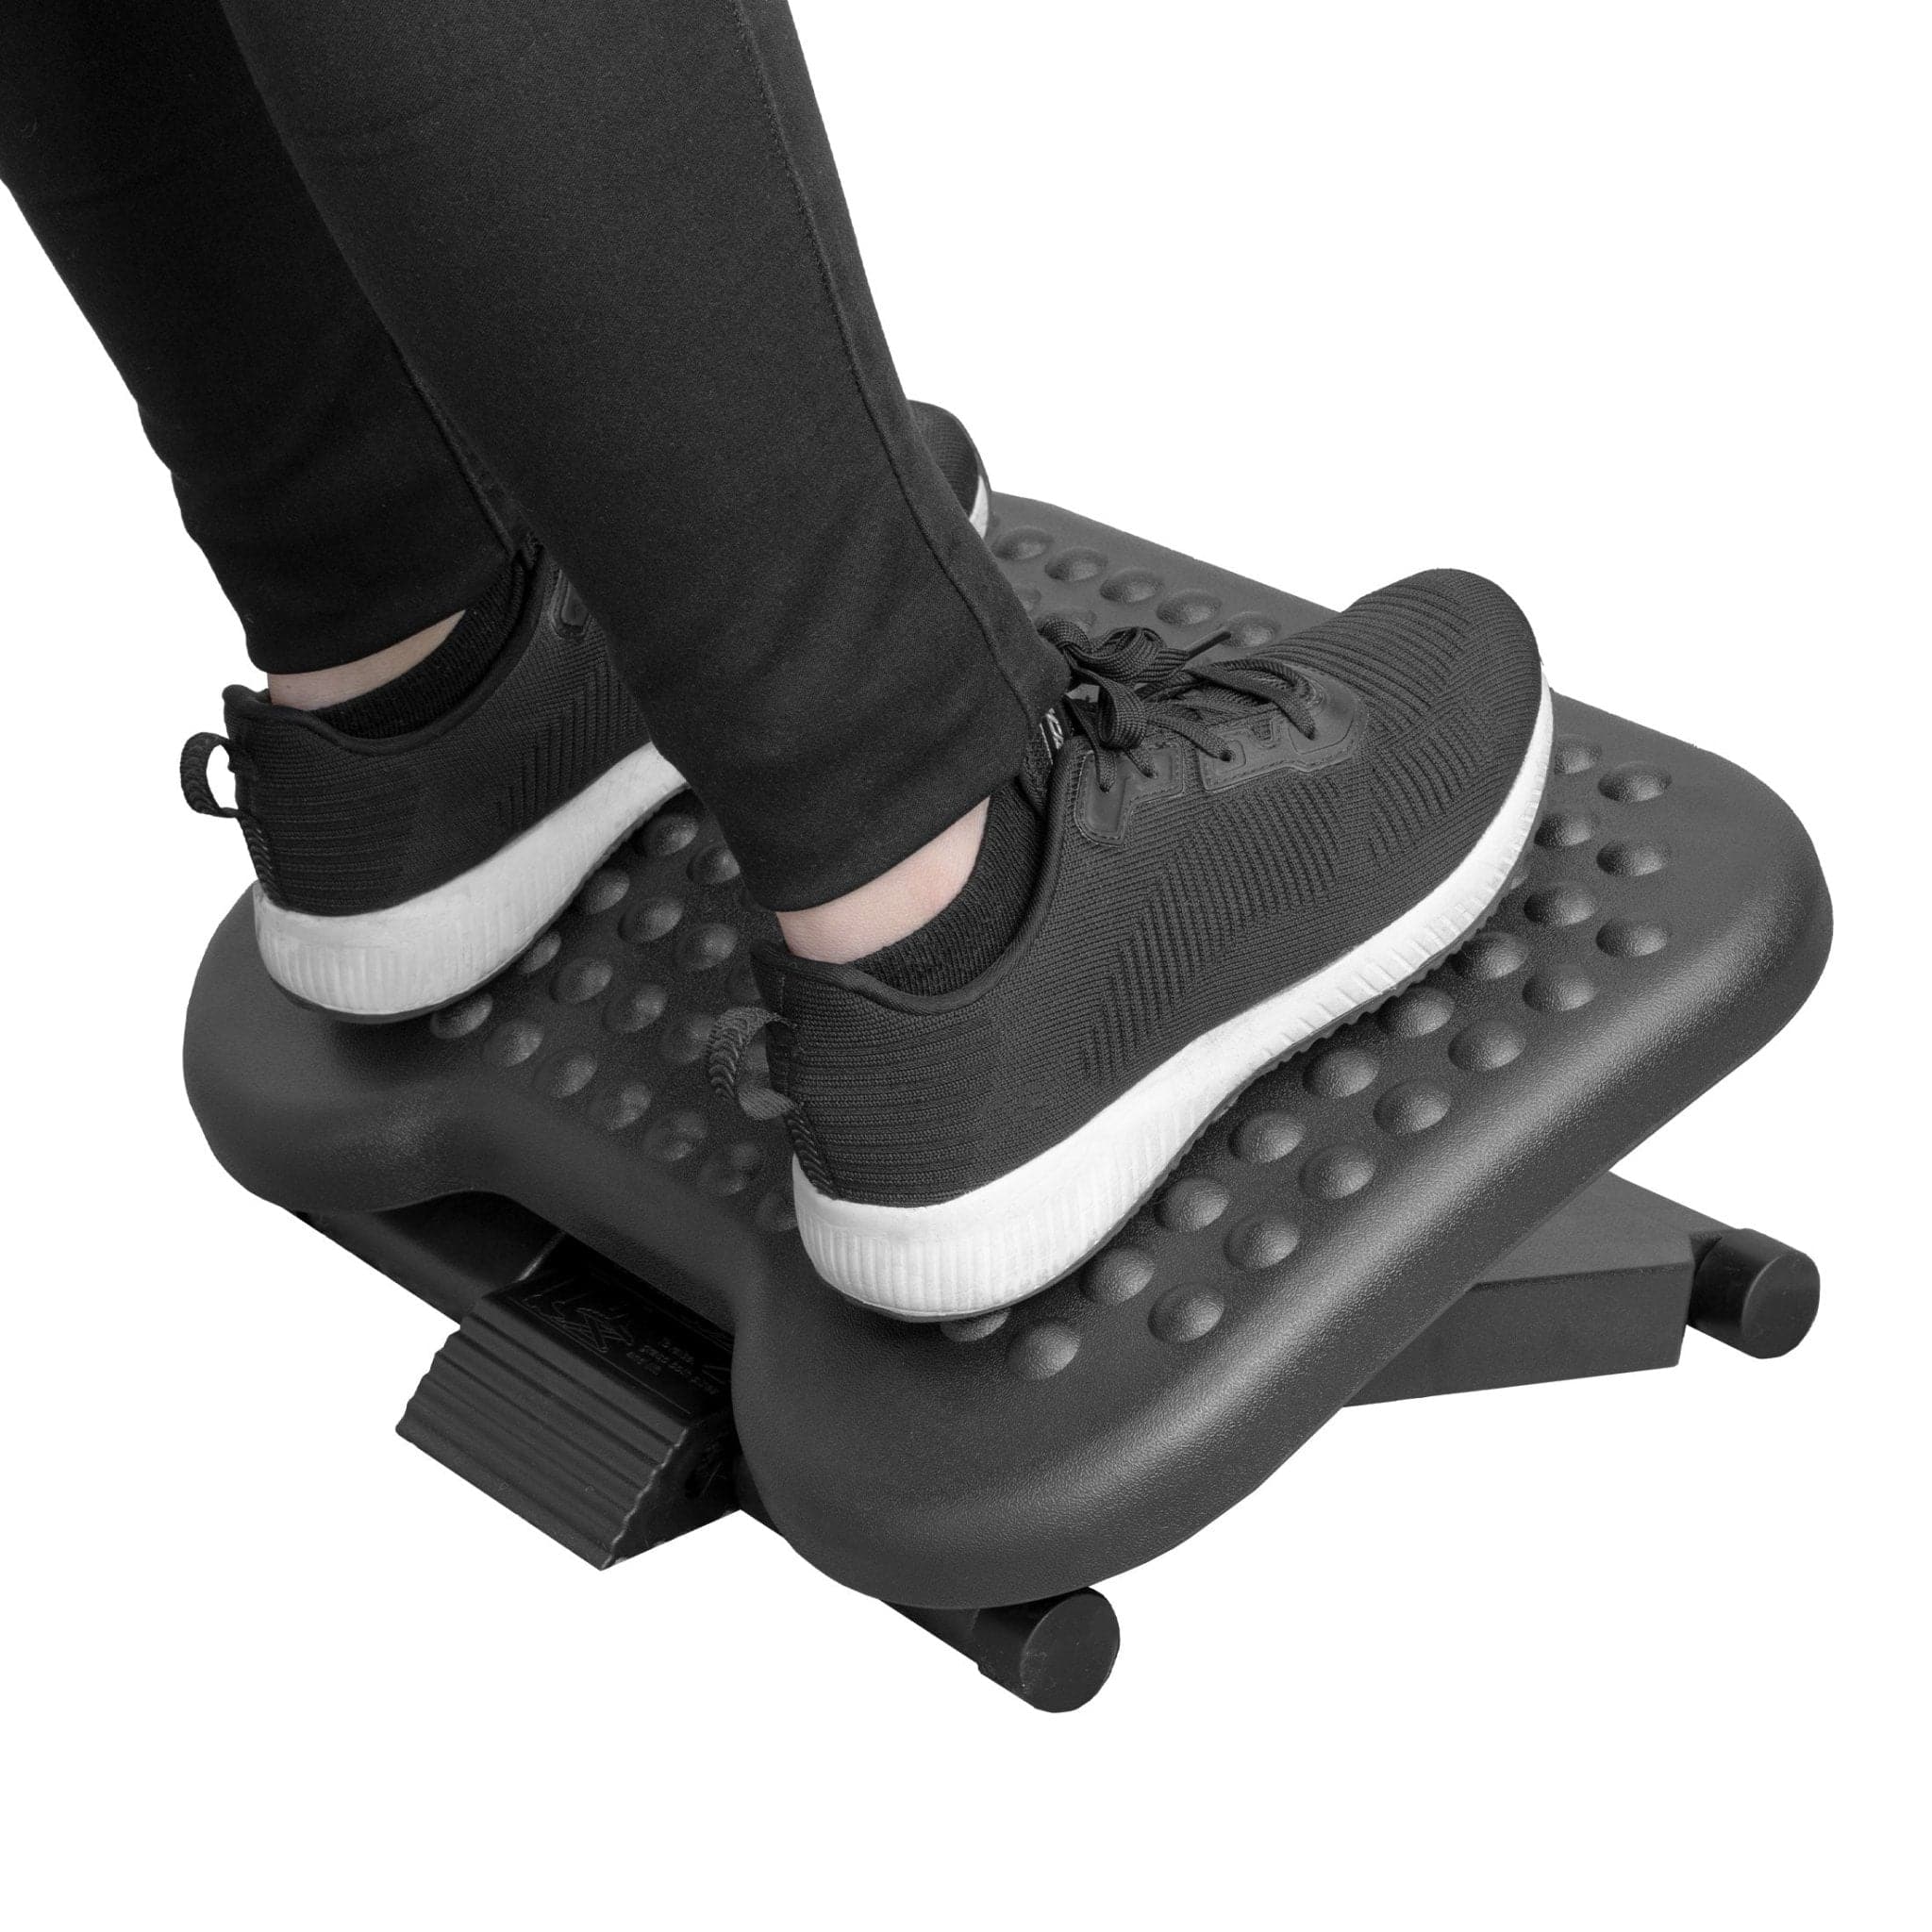 Mount-it! Footrest With Massaging Bead